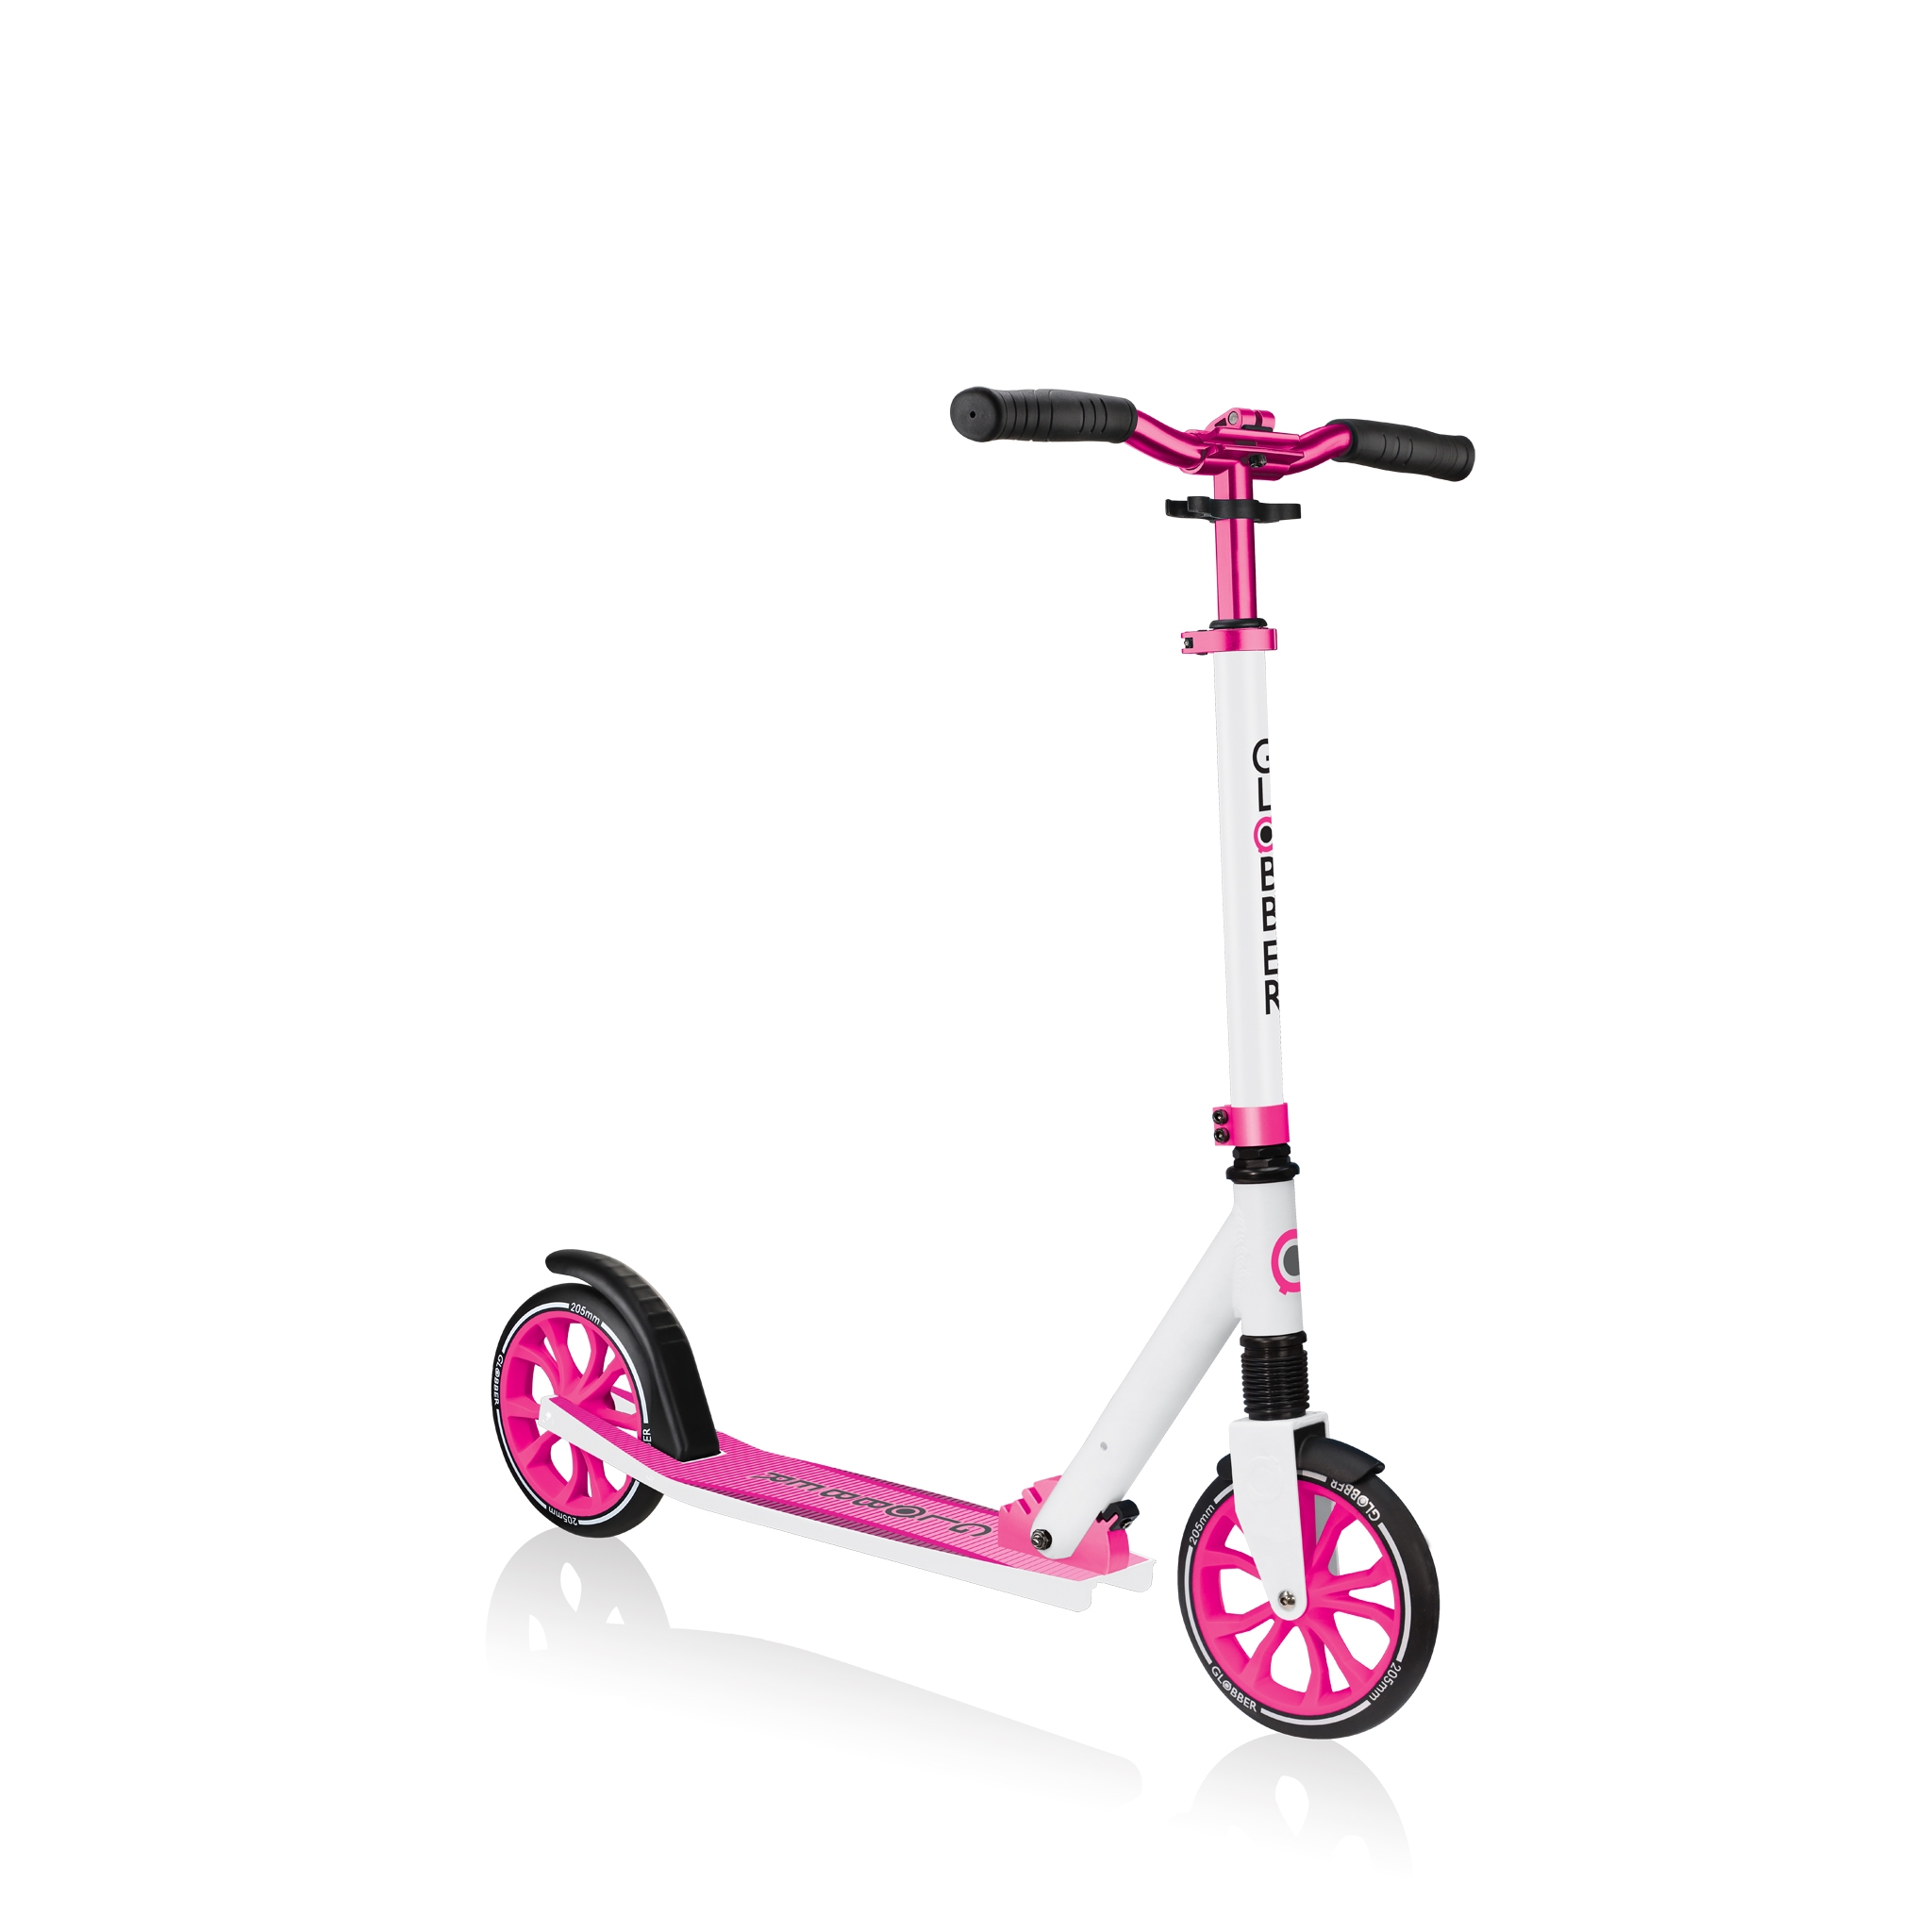 Globber-NL-205-big-wheel-scooter-for-kids-aged-8-and-above 0